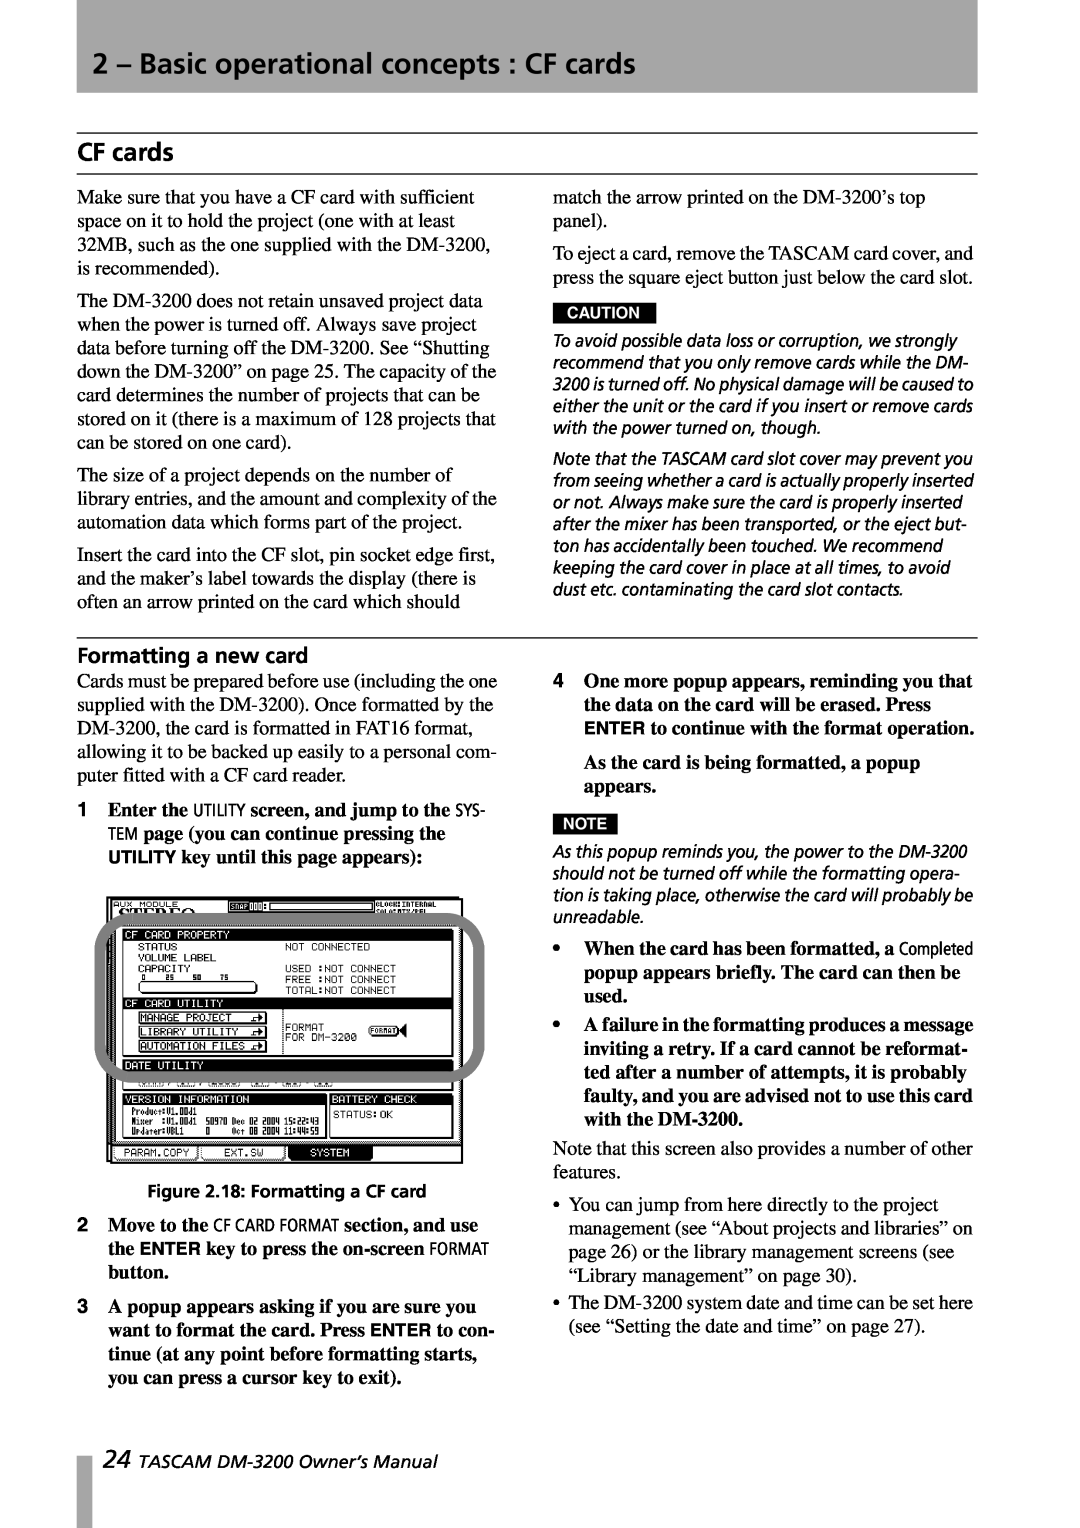 Tascam DM-3200 owner manual 2 – Basic operational concepts : CF cards, Formatting a new card 